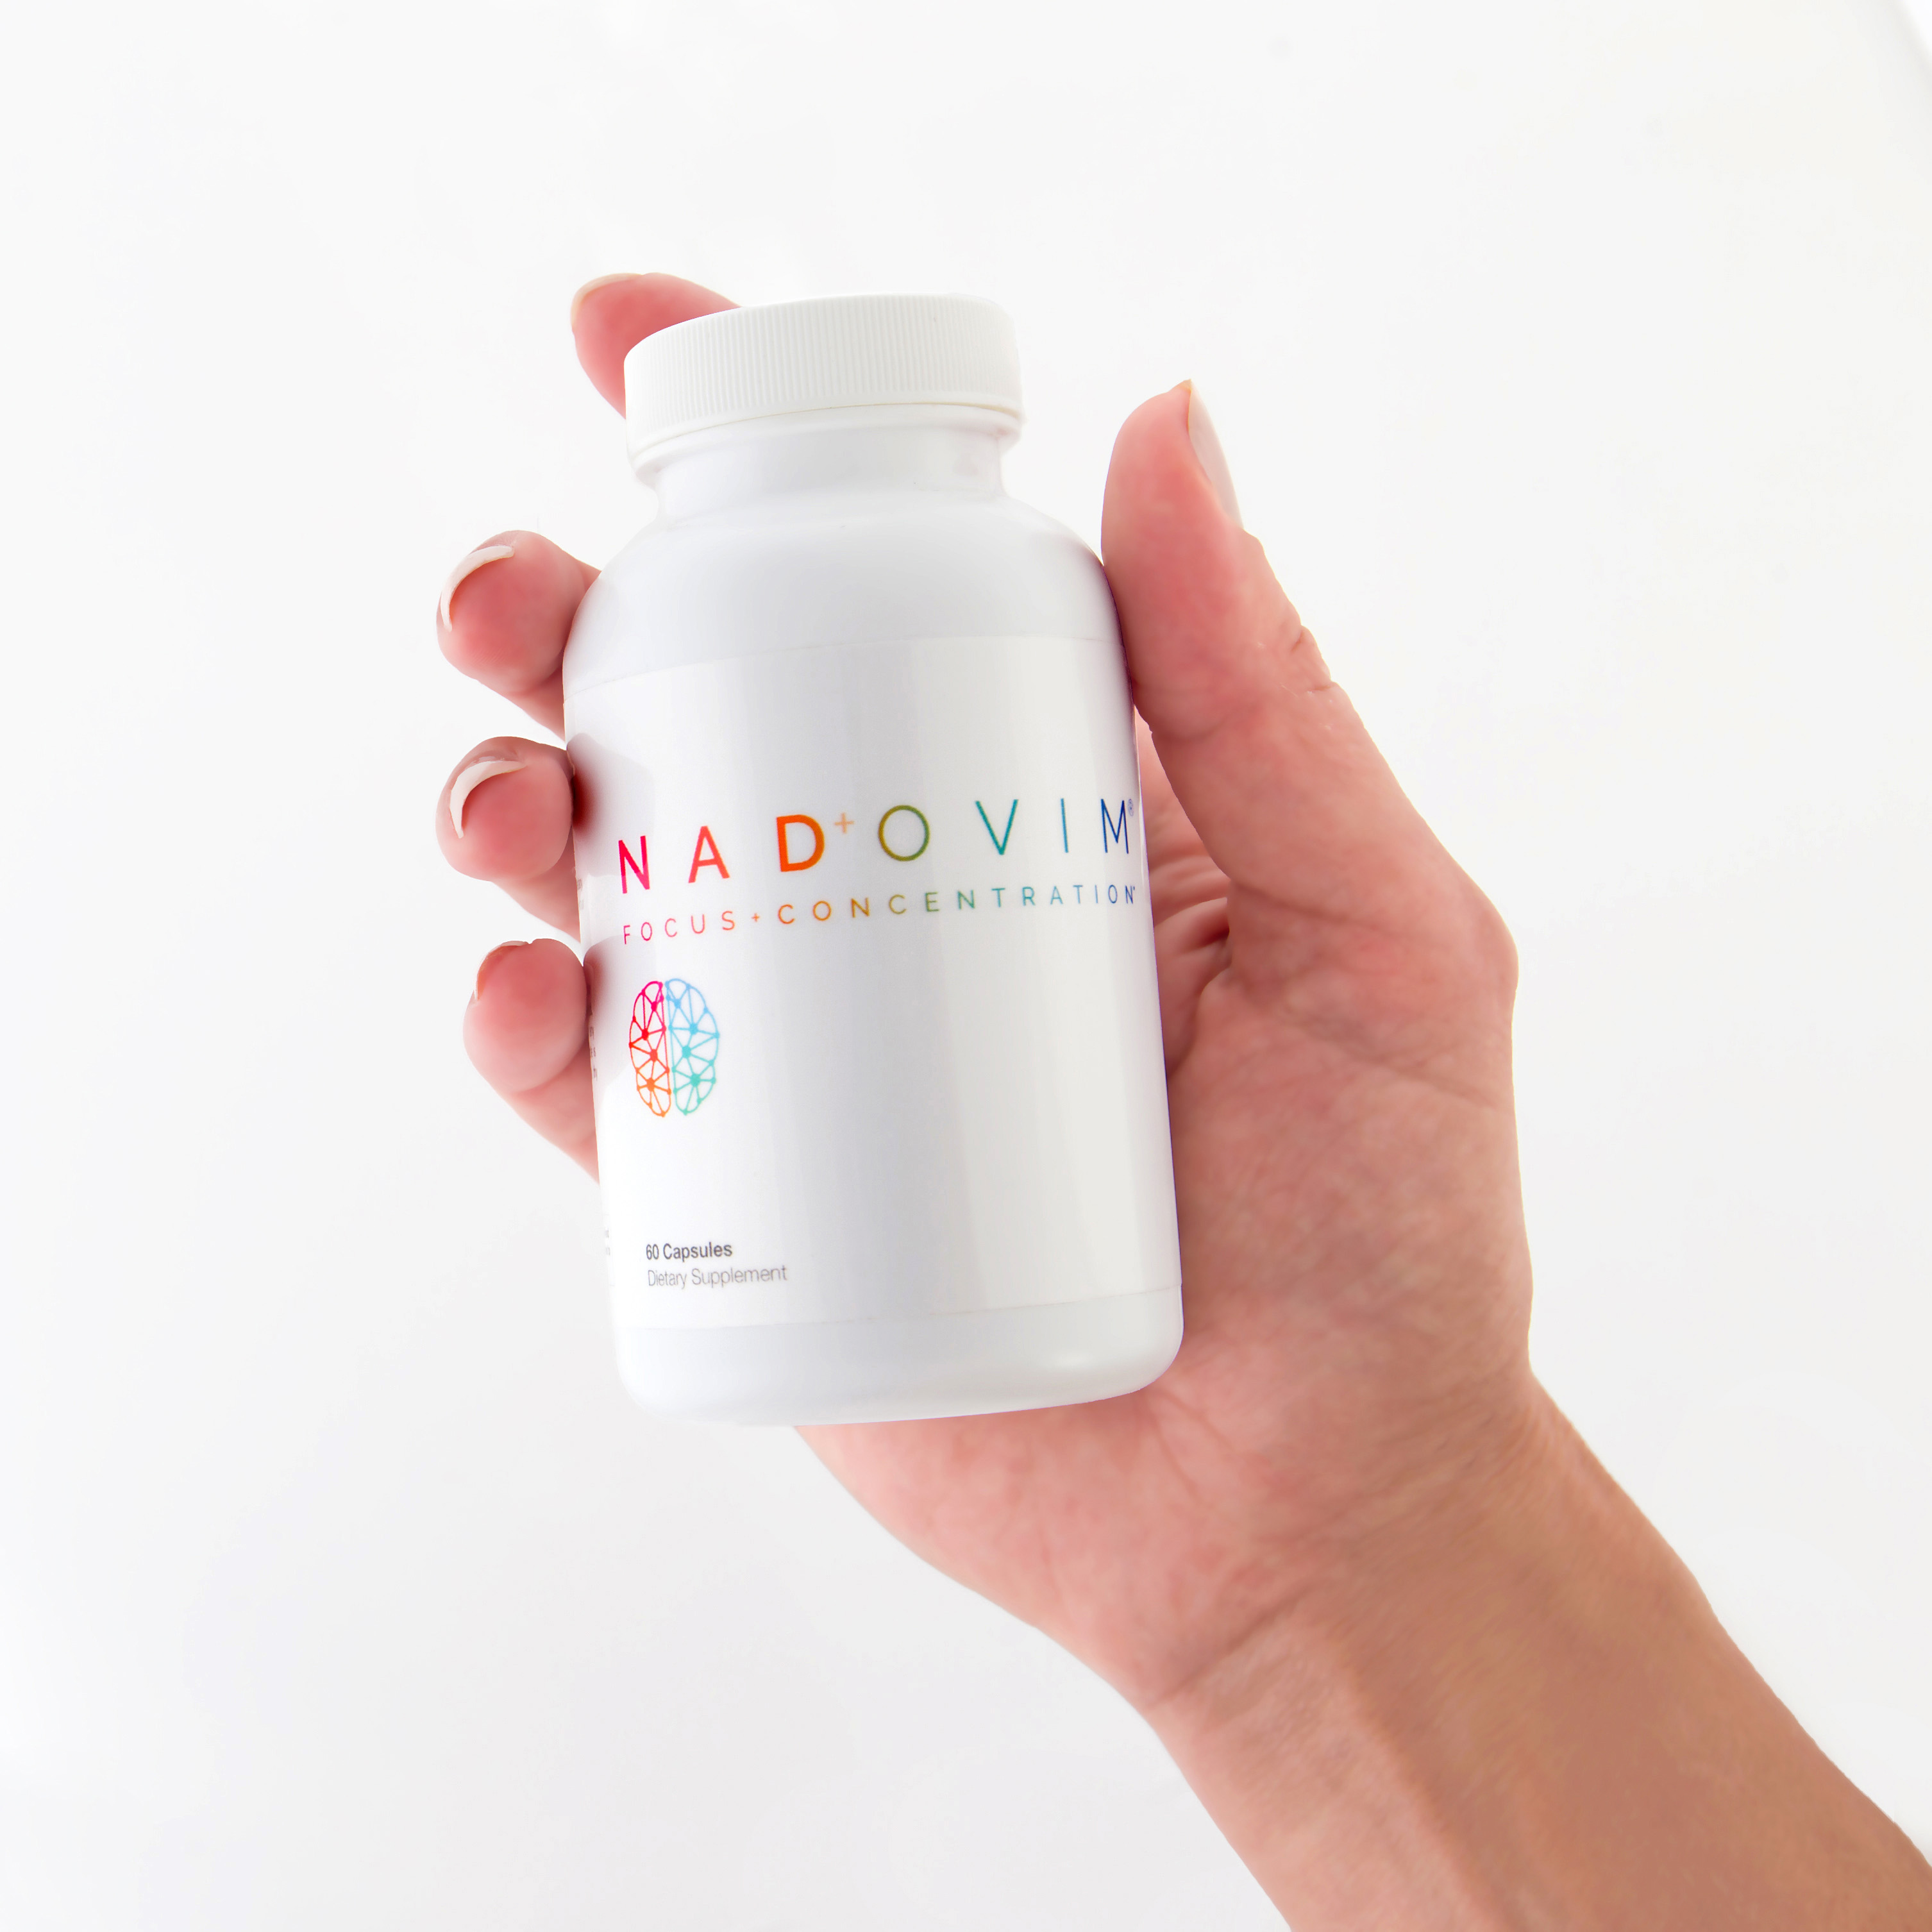 Nadovim was designed and developed by a top pharmaceutical and nutraceutical team lead by the distinguished integrative physician, Thomas K. Szulc, MD.